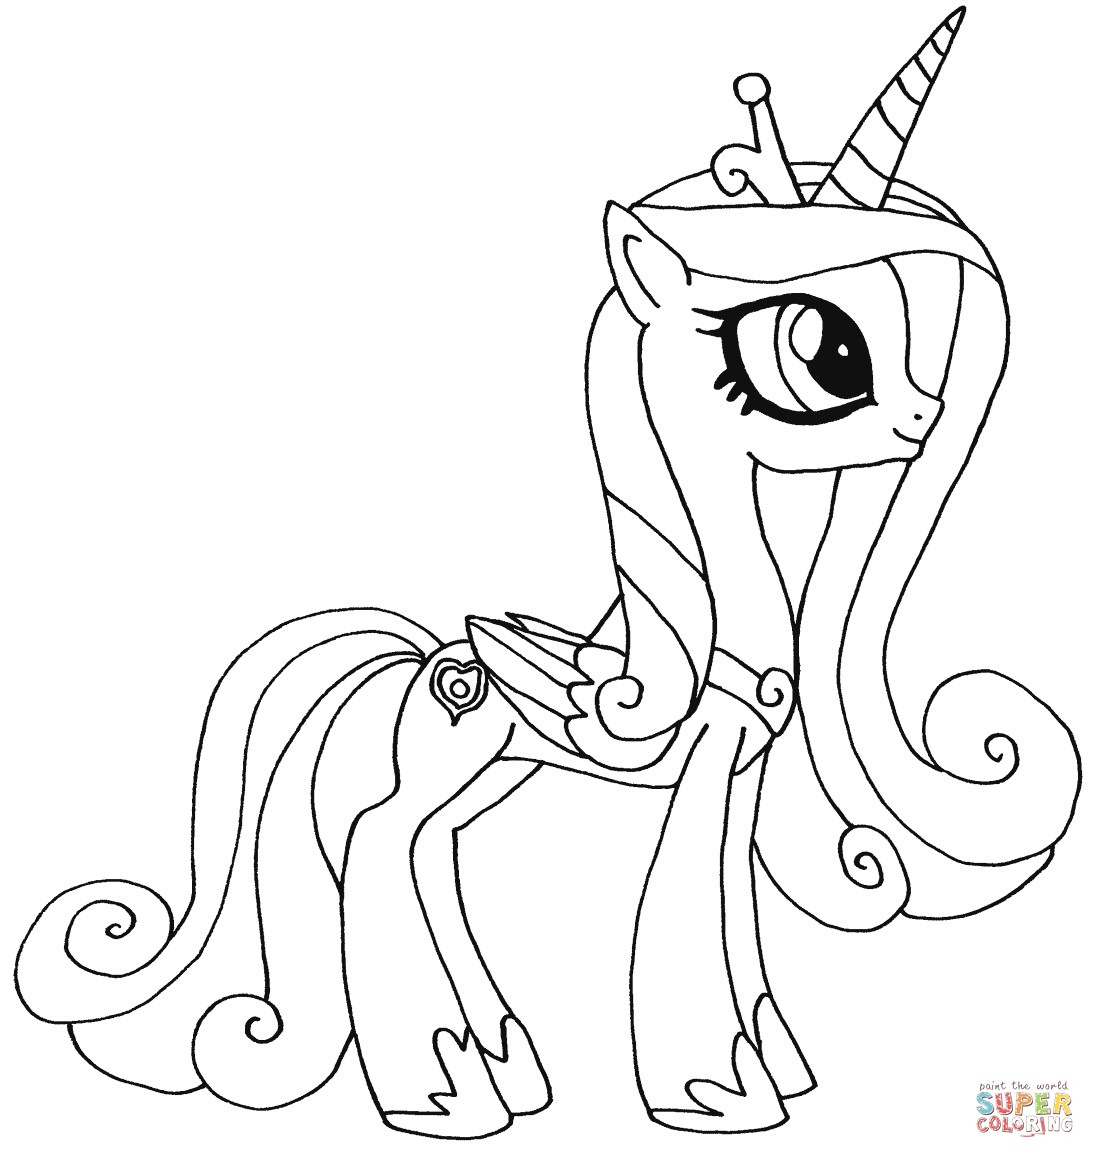 My Little Pony Coloring Pages | Free Coloring Pages - Free Printable My Little Pony Coloring Pages